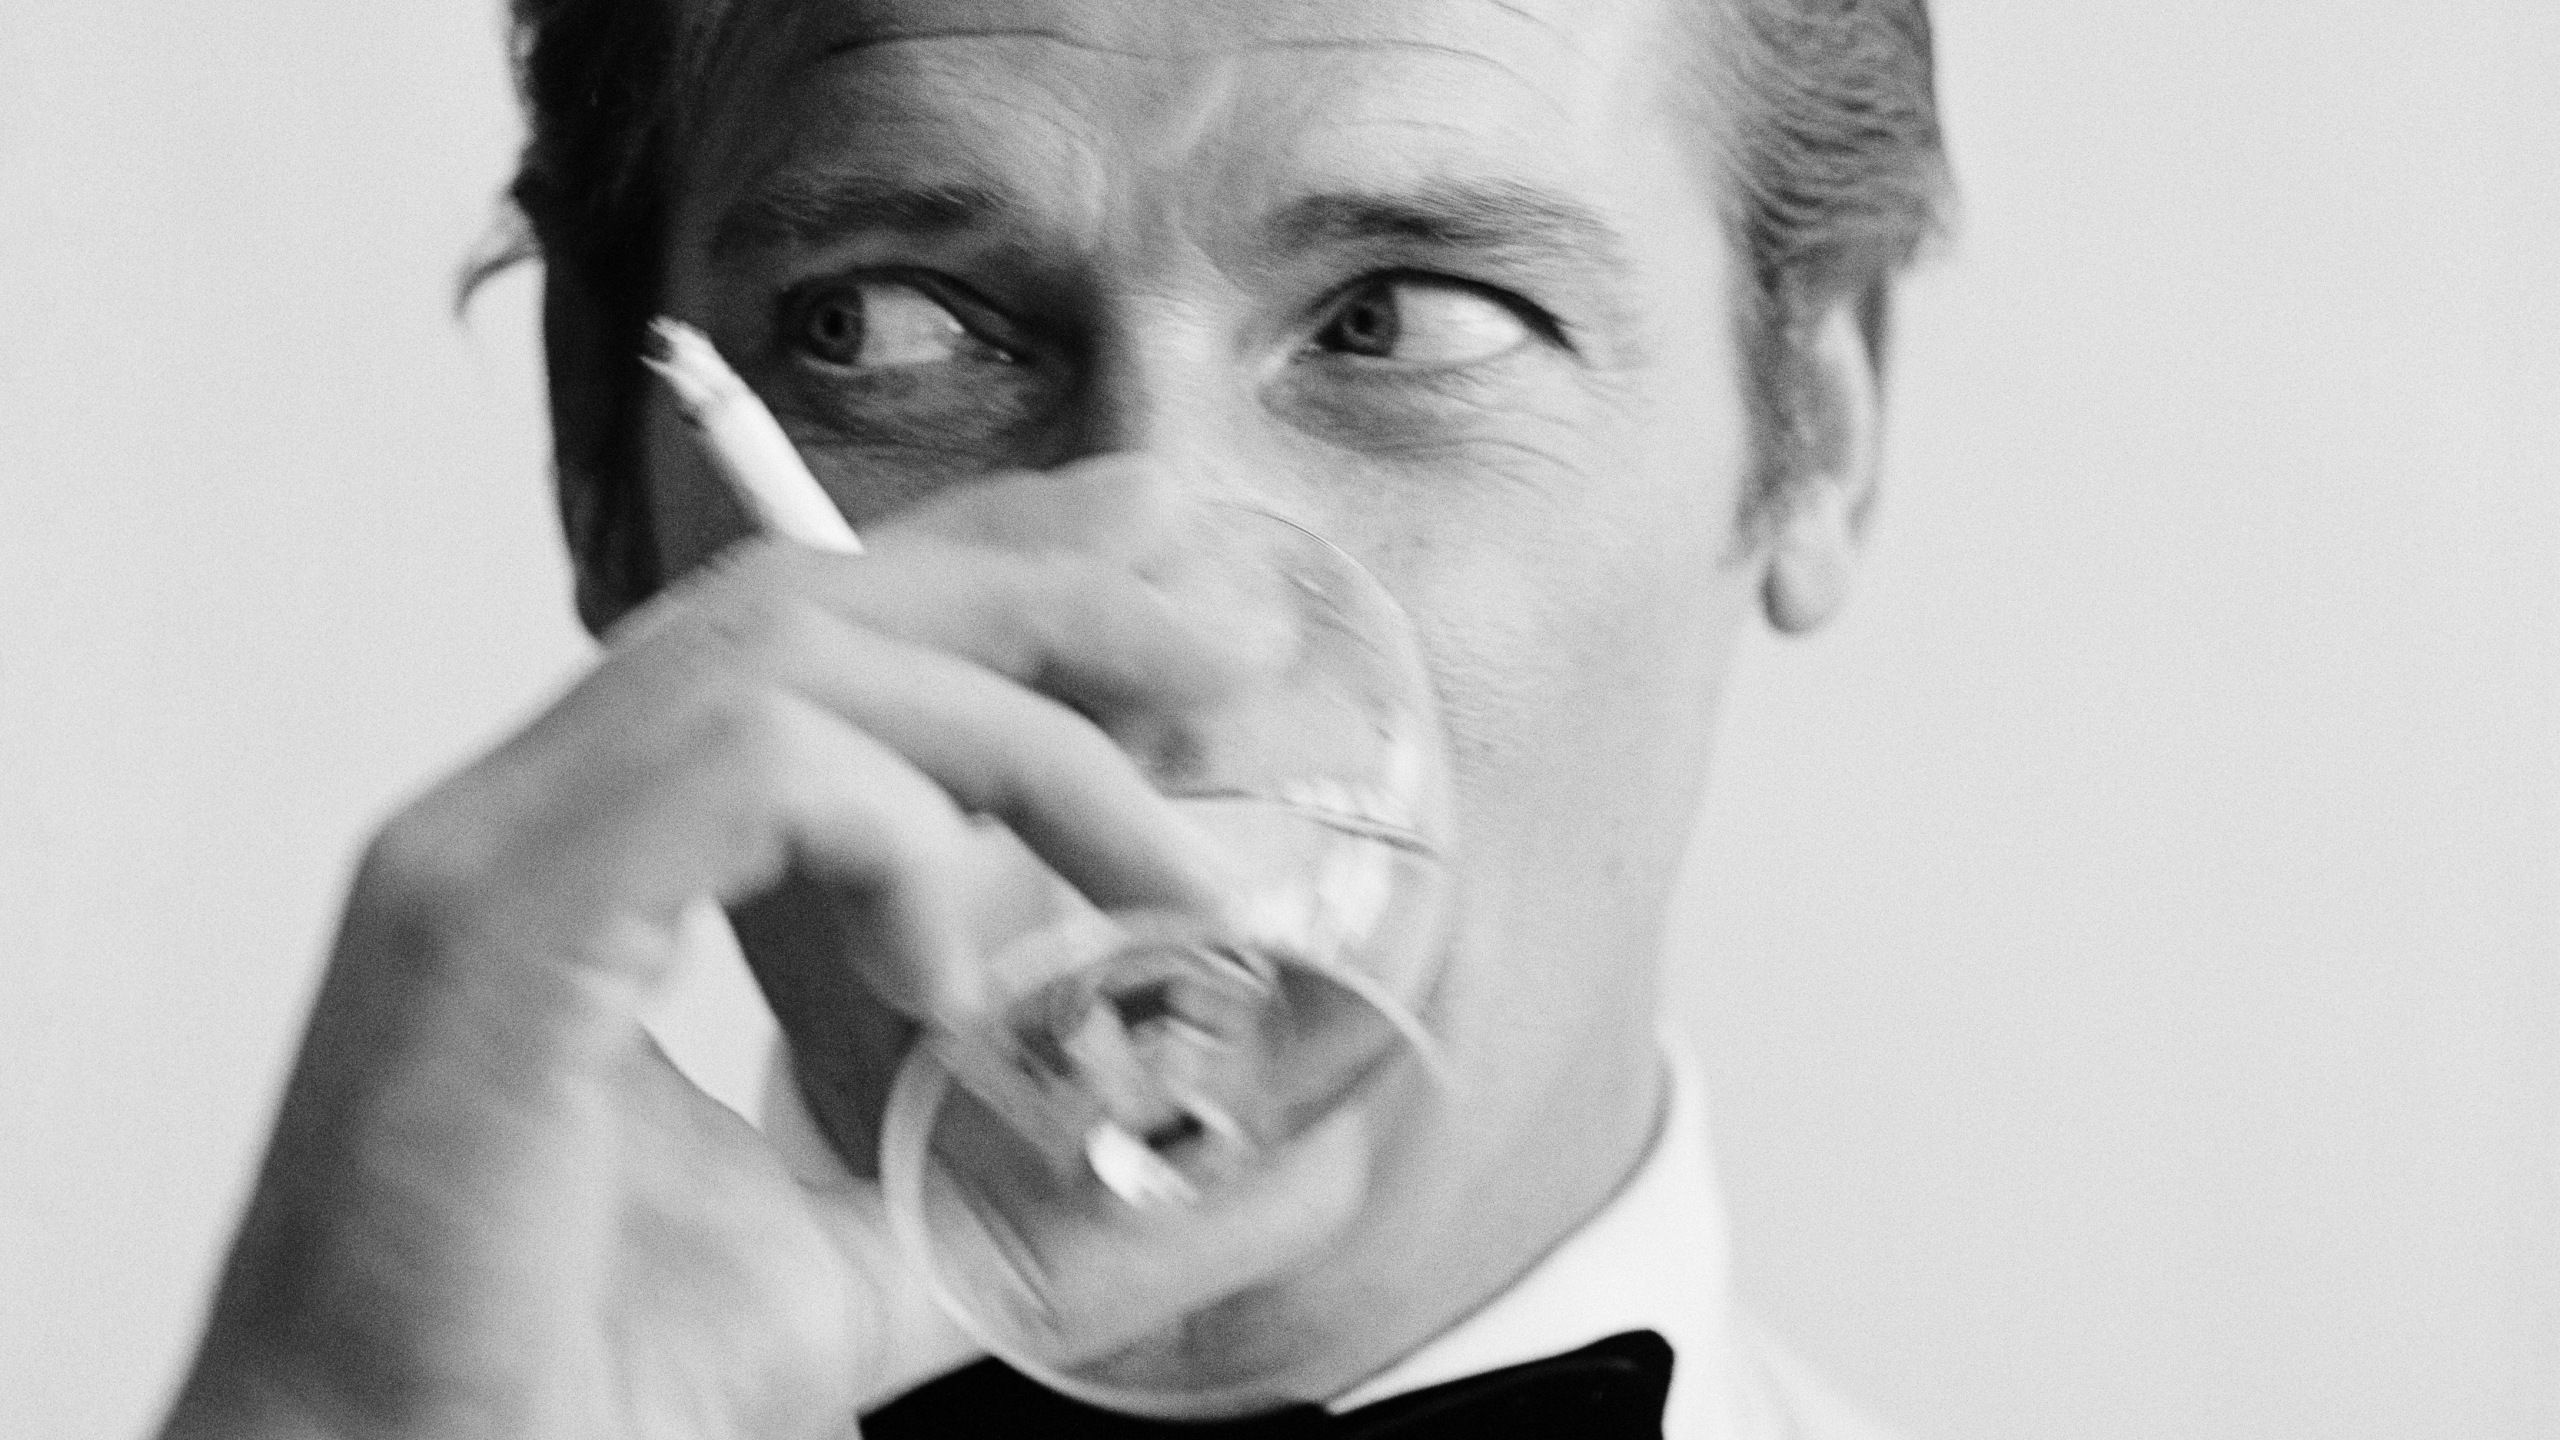 Remembering Roger Moore with the founder of the Ian Fleming